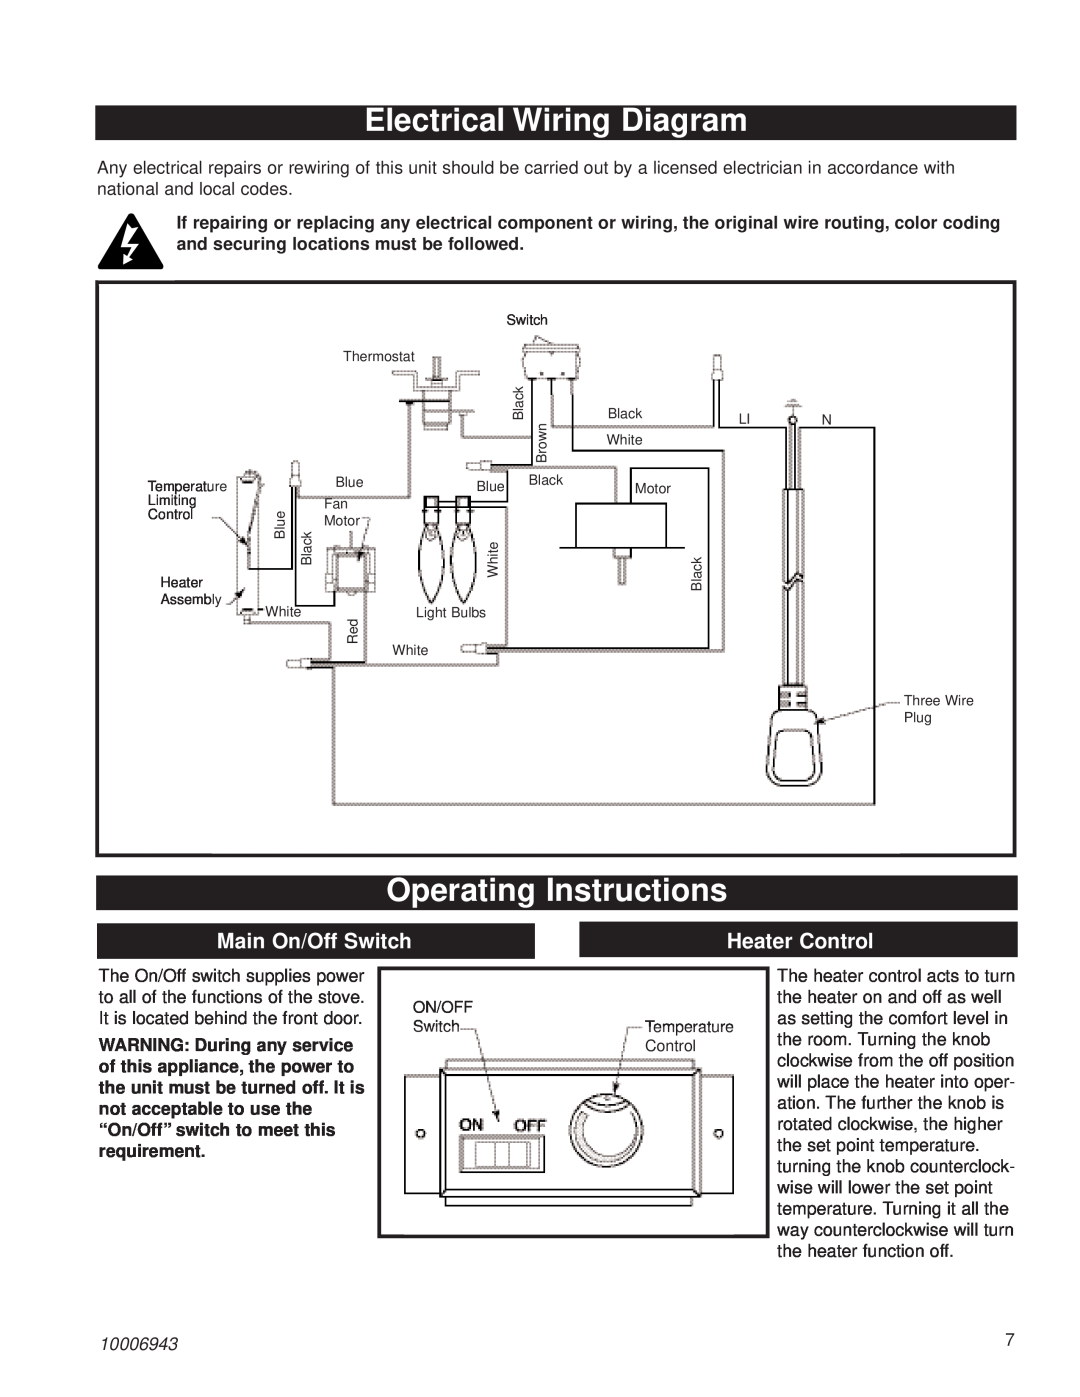 Century HES60 Electrical Wiring Diagram, Operating Instructions, Main On/Off Switch, Heater Control, 10006943 